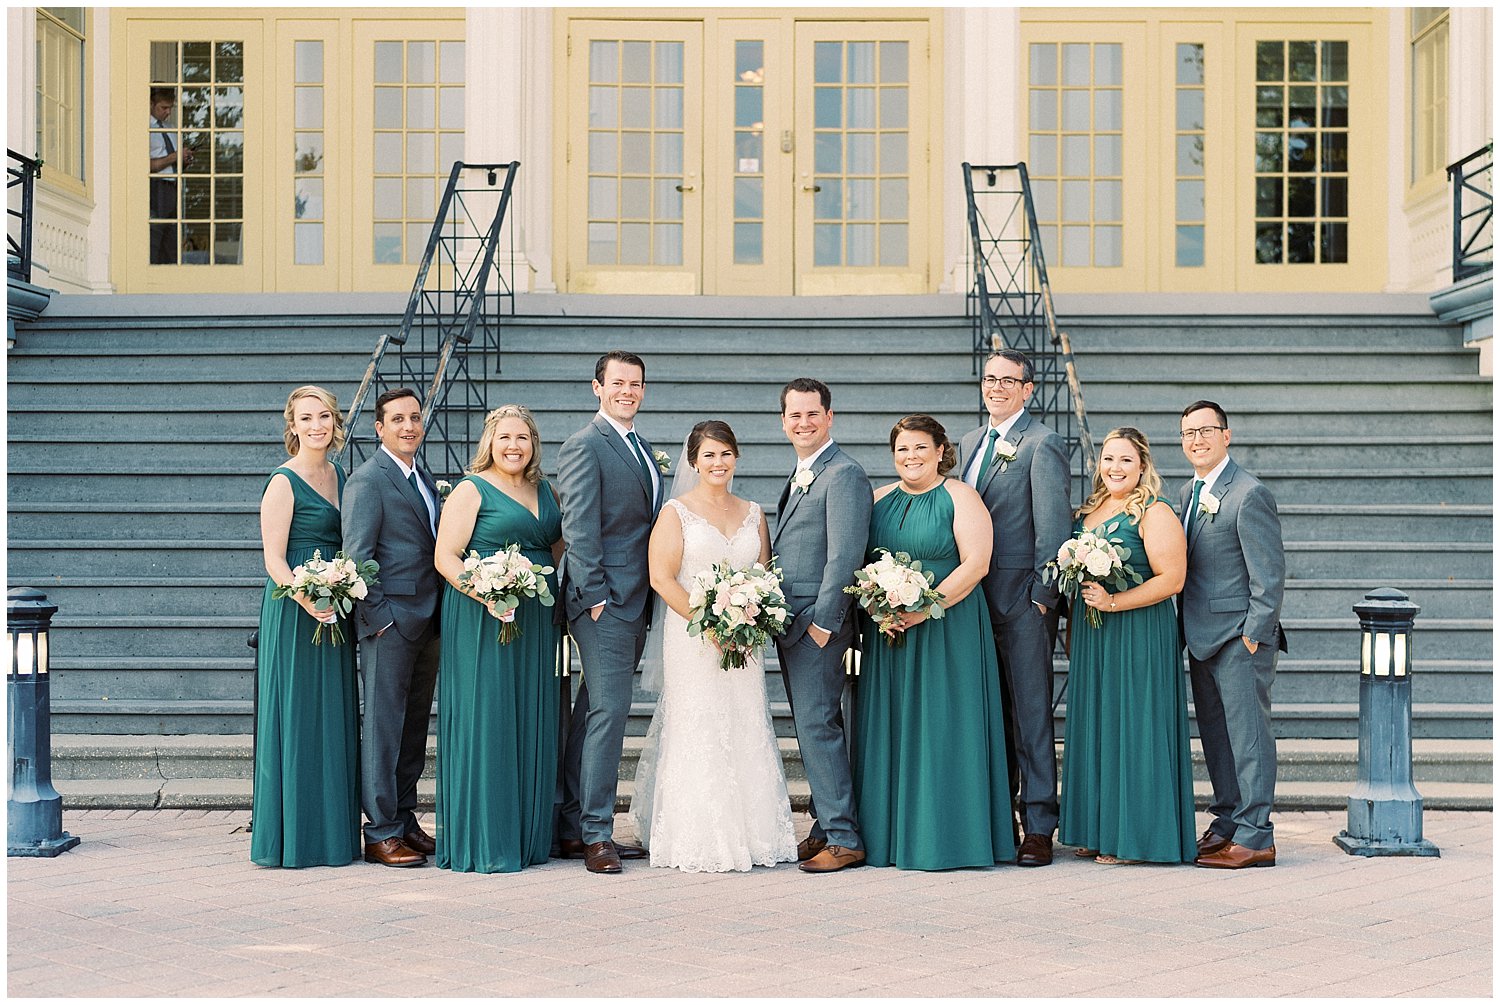 Wedding party photos at Maryland Zoo mansion house